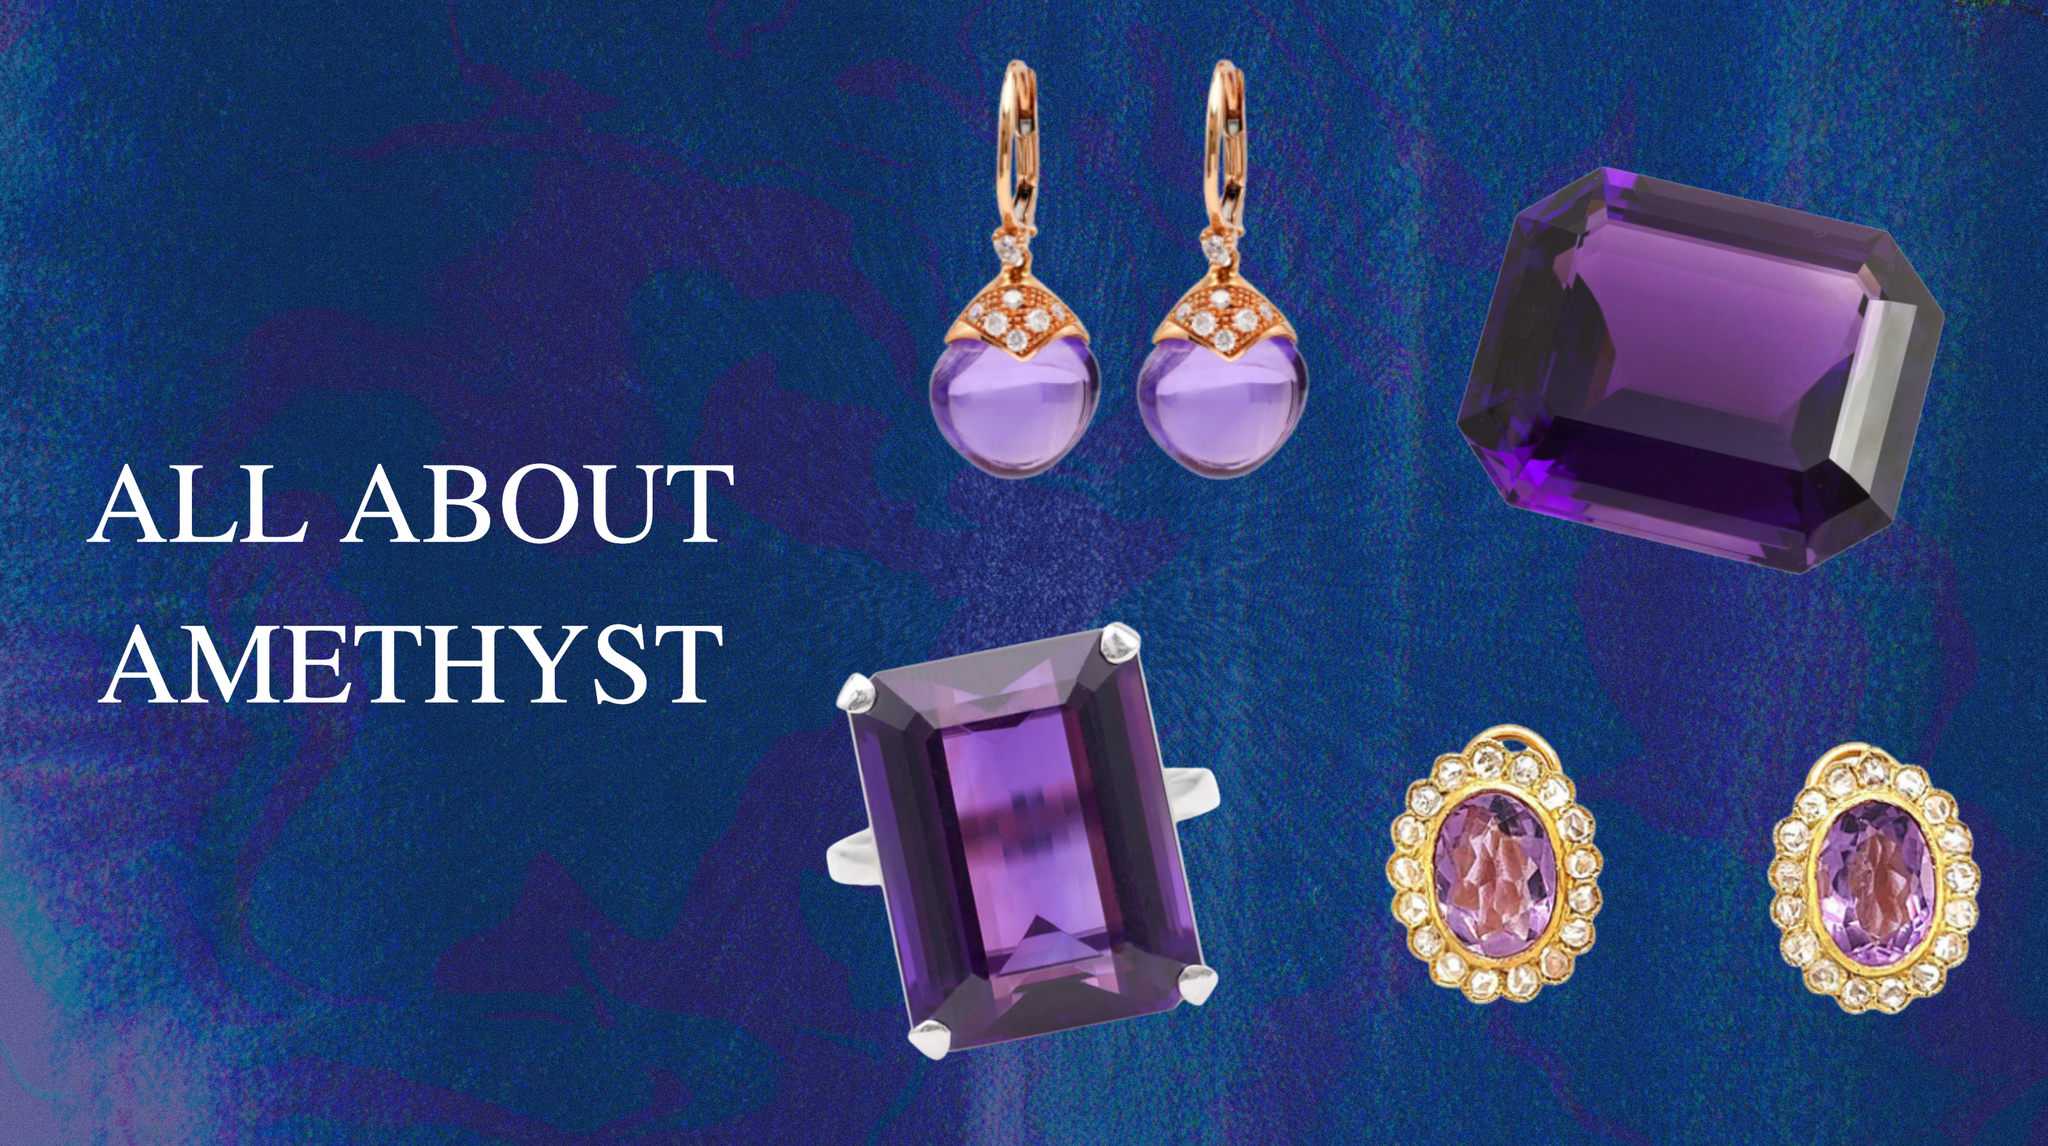 All About Amethyst